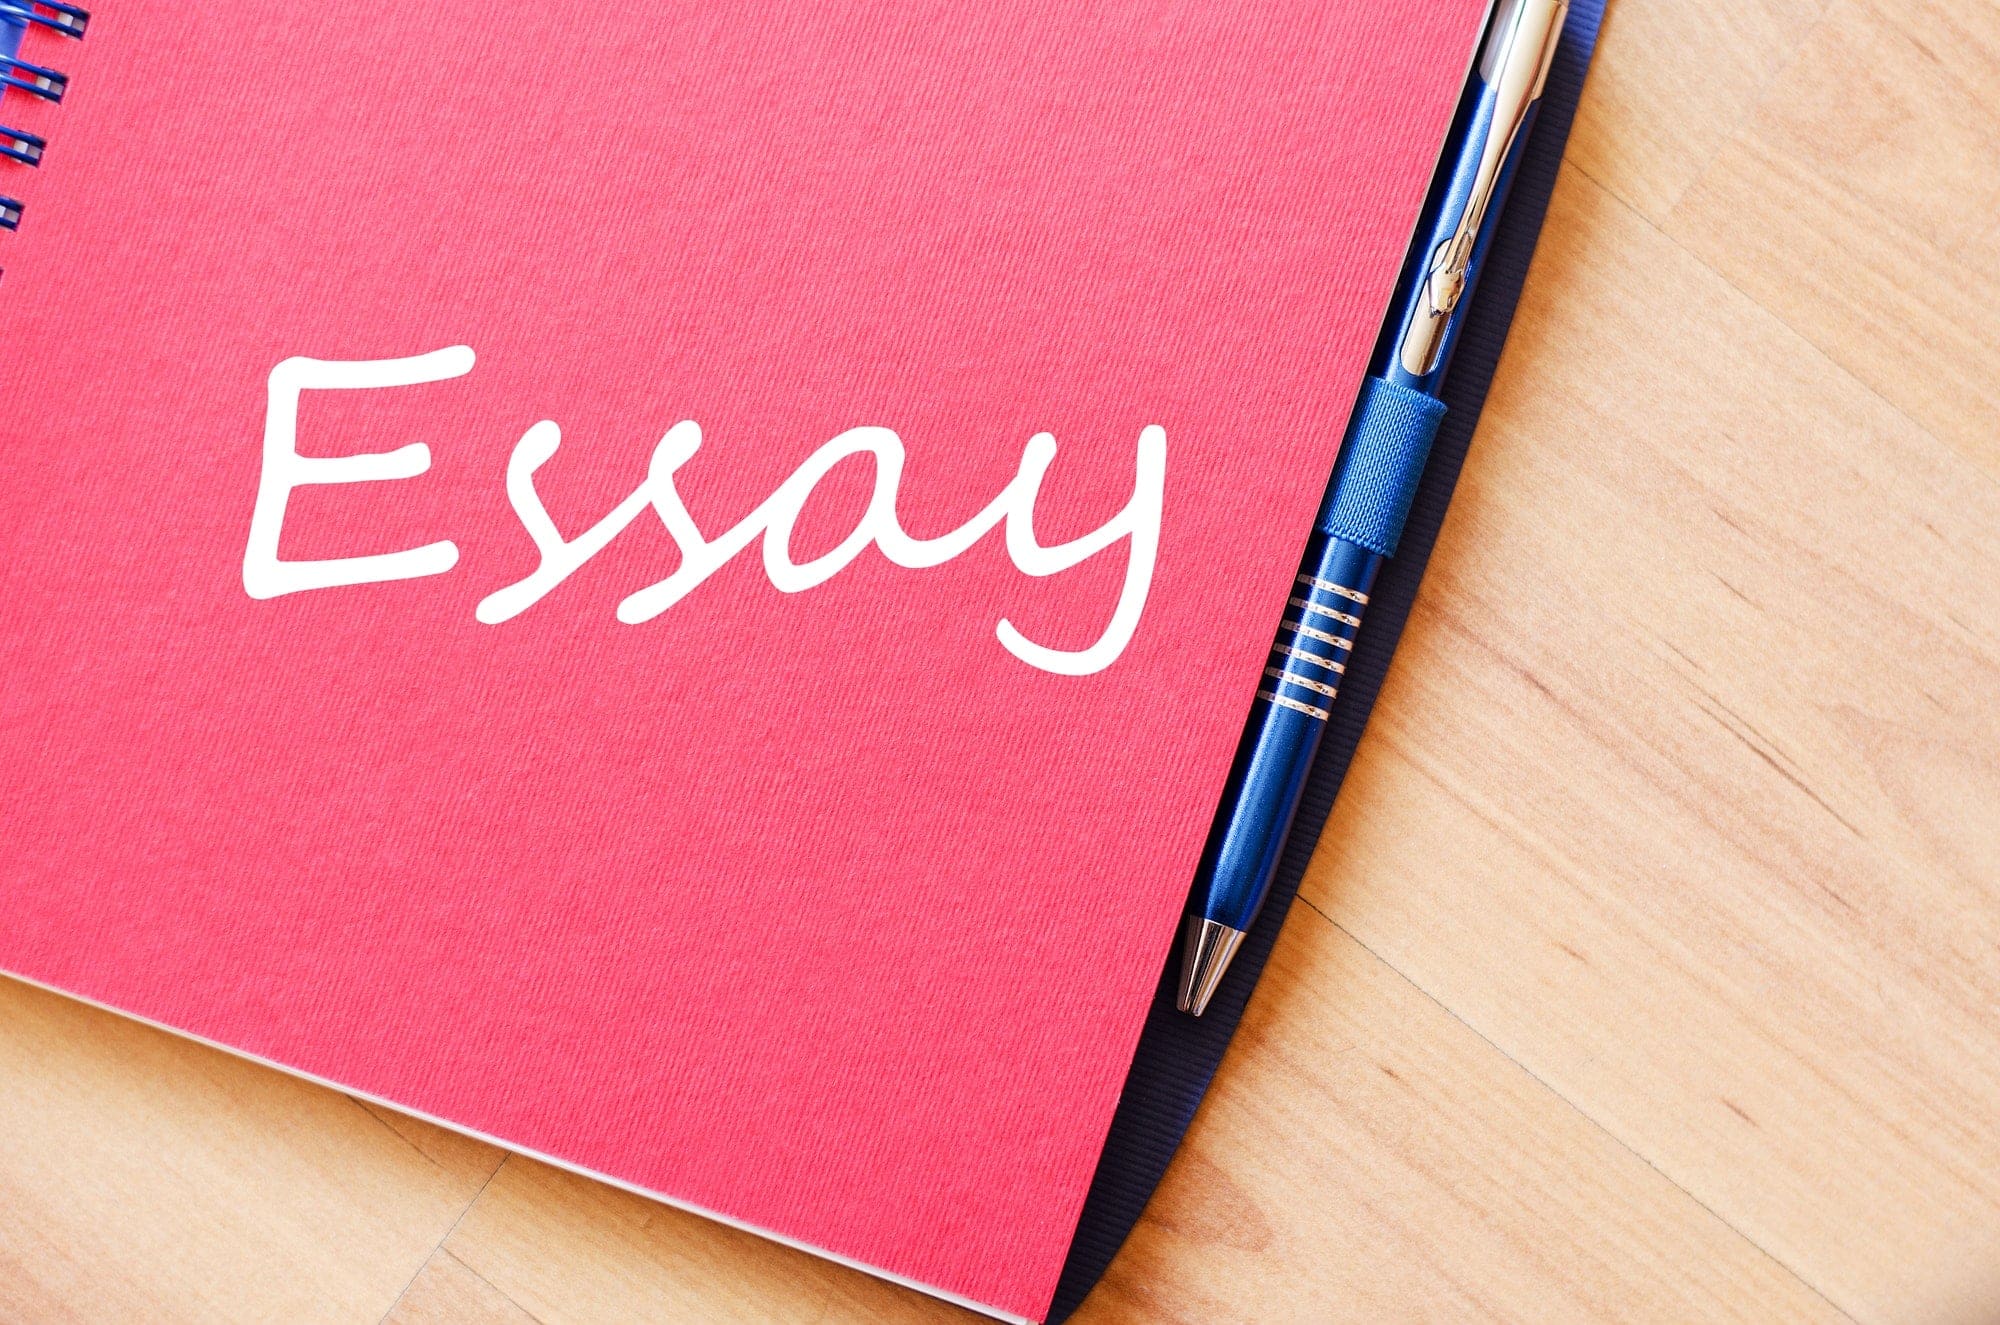 buying experience essay